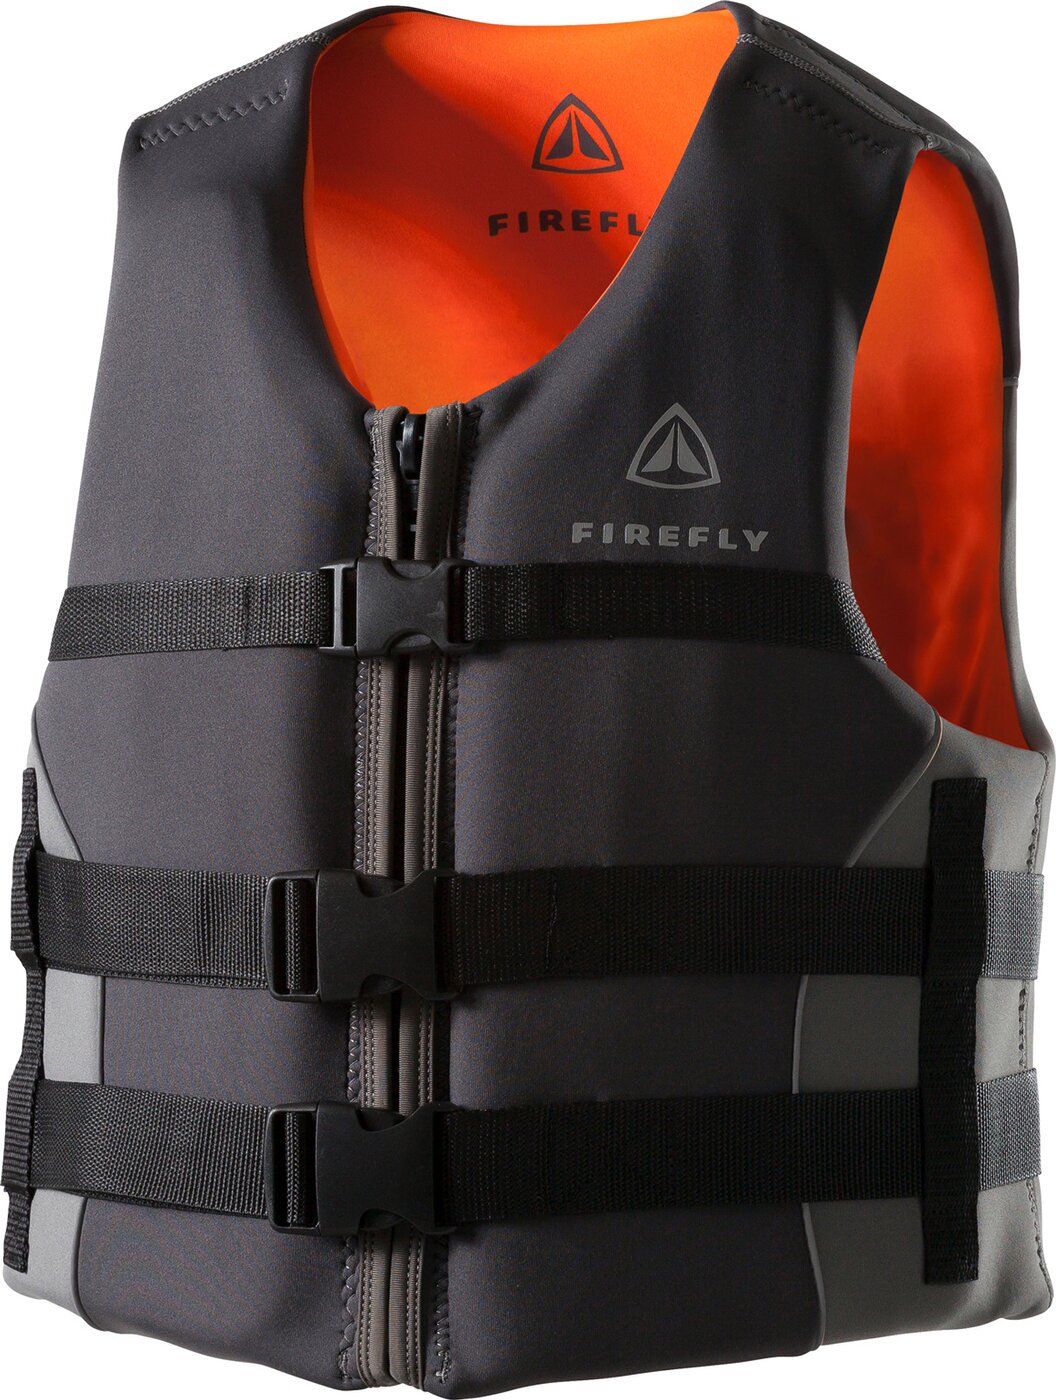 https://www.gue-sport.de/out/pictures/master/product/1/firefly_schutzweste_swim_vest_adults_289436_900_1253.jpg